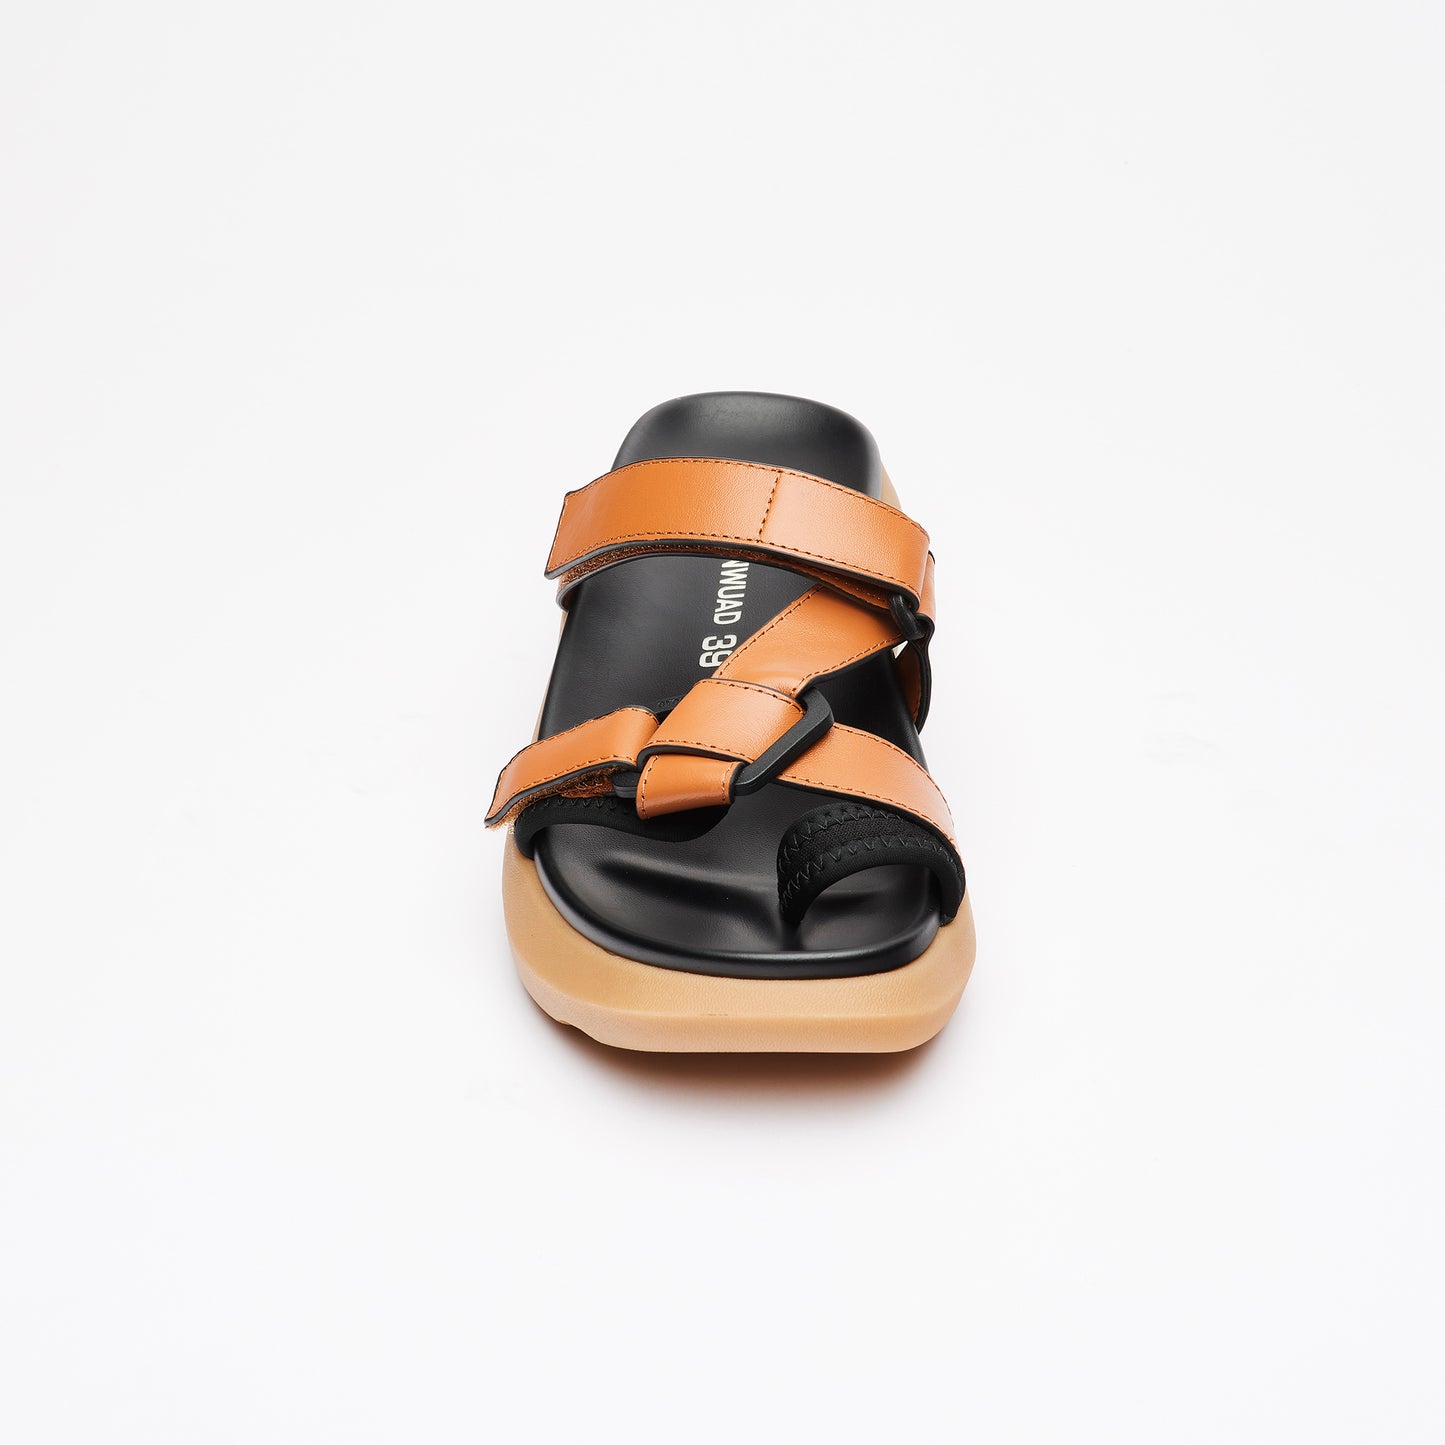 COCO LEATHER SANDAL